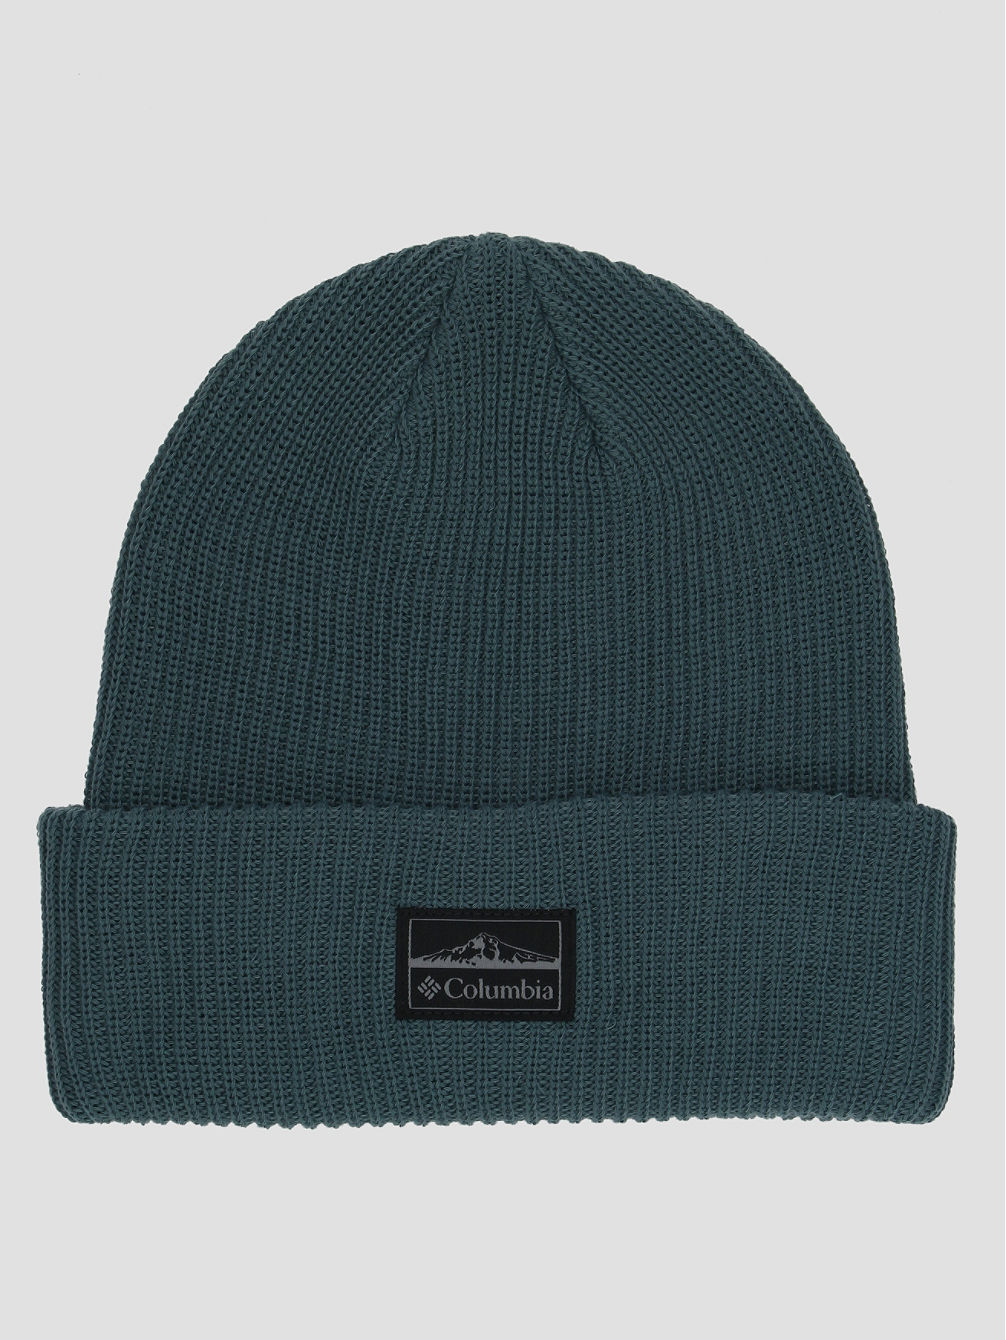 Lost Lager II Beanie